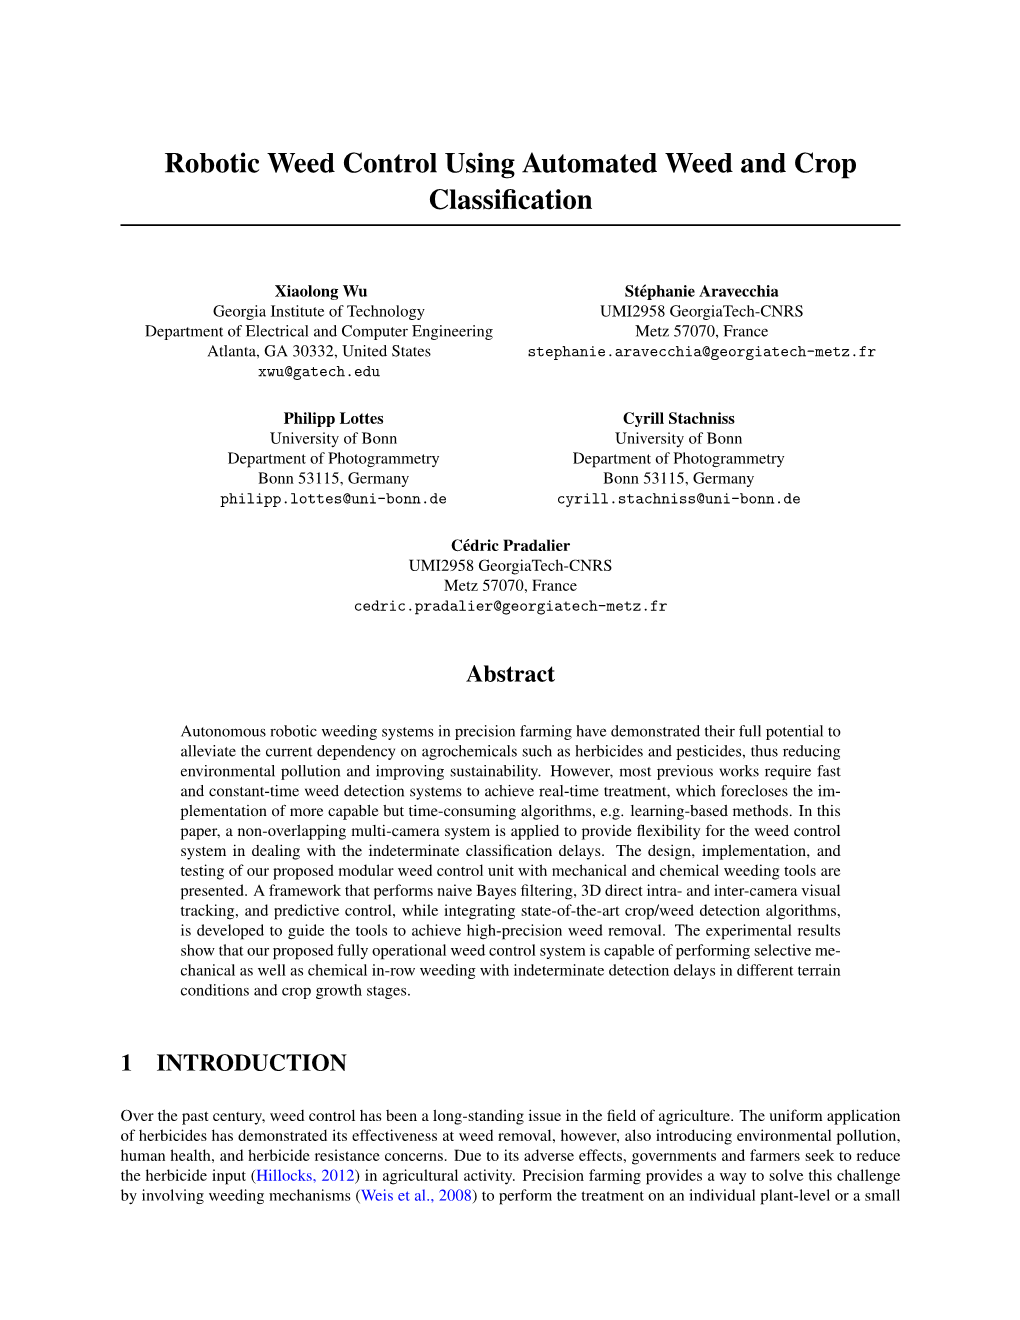 Robotic Weed Control Using Automated Weed and Crop Classiﬁcation